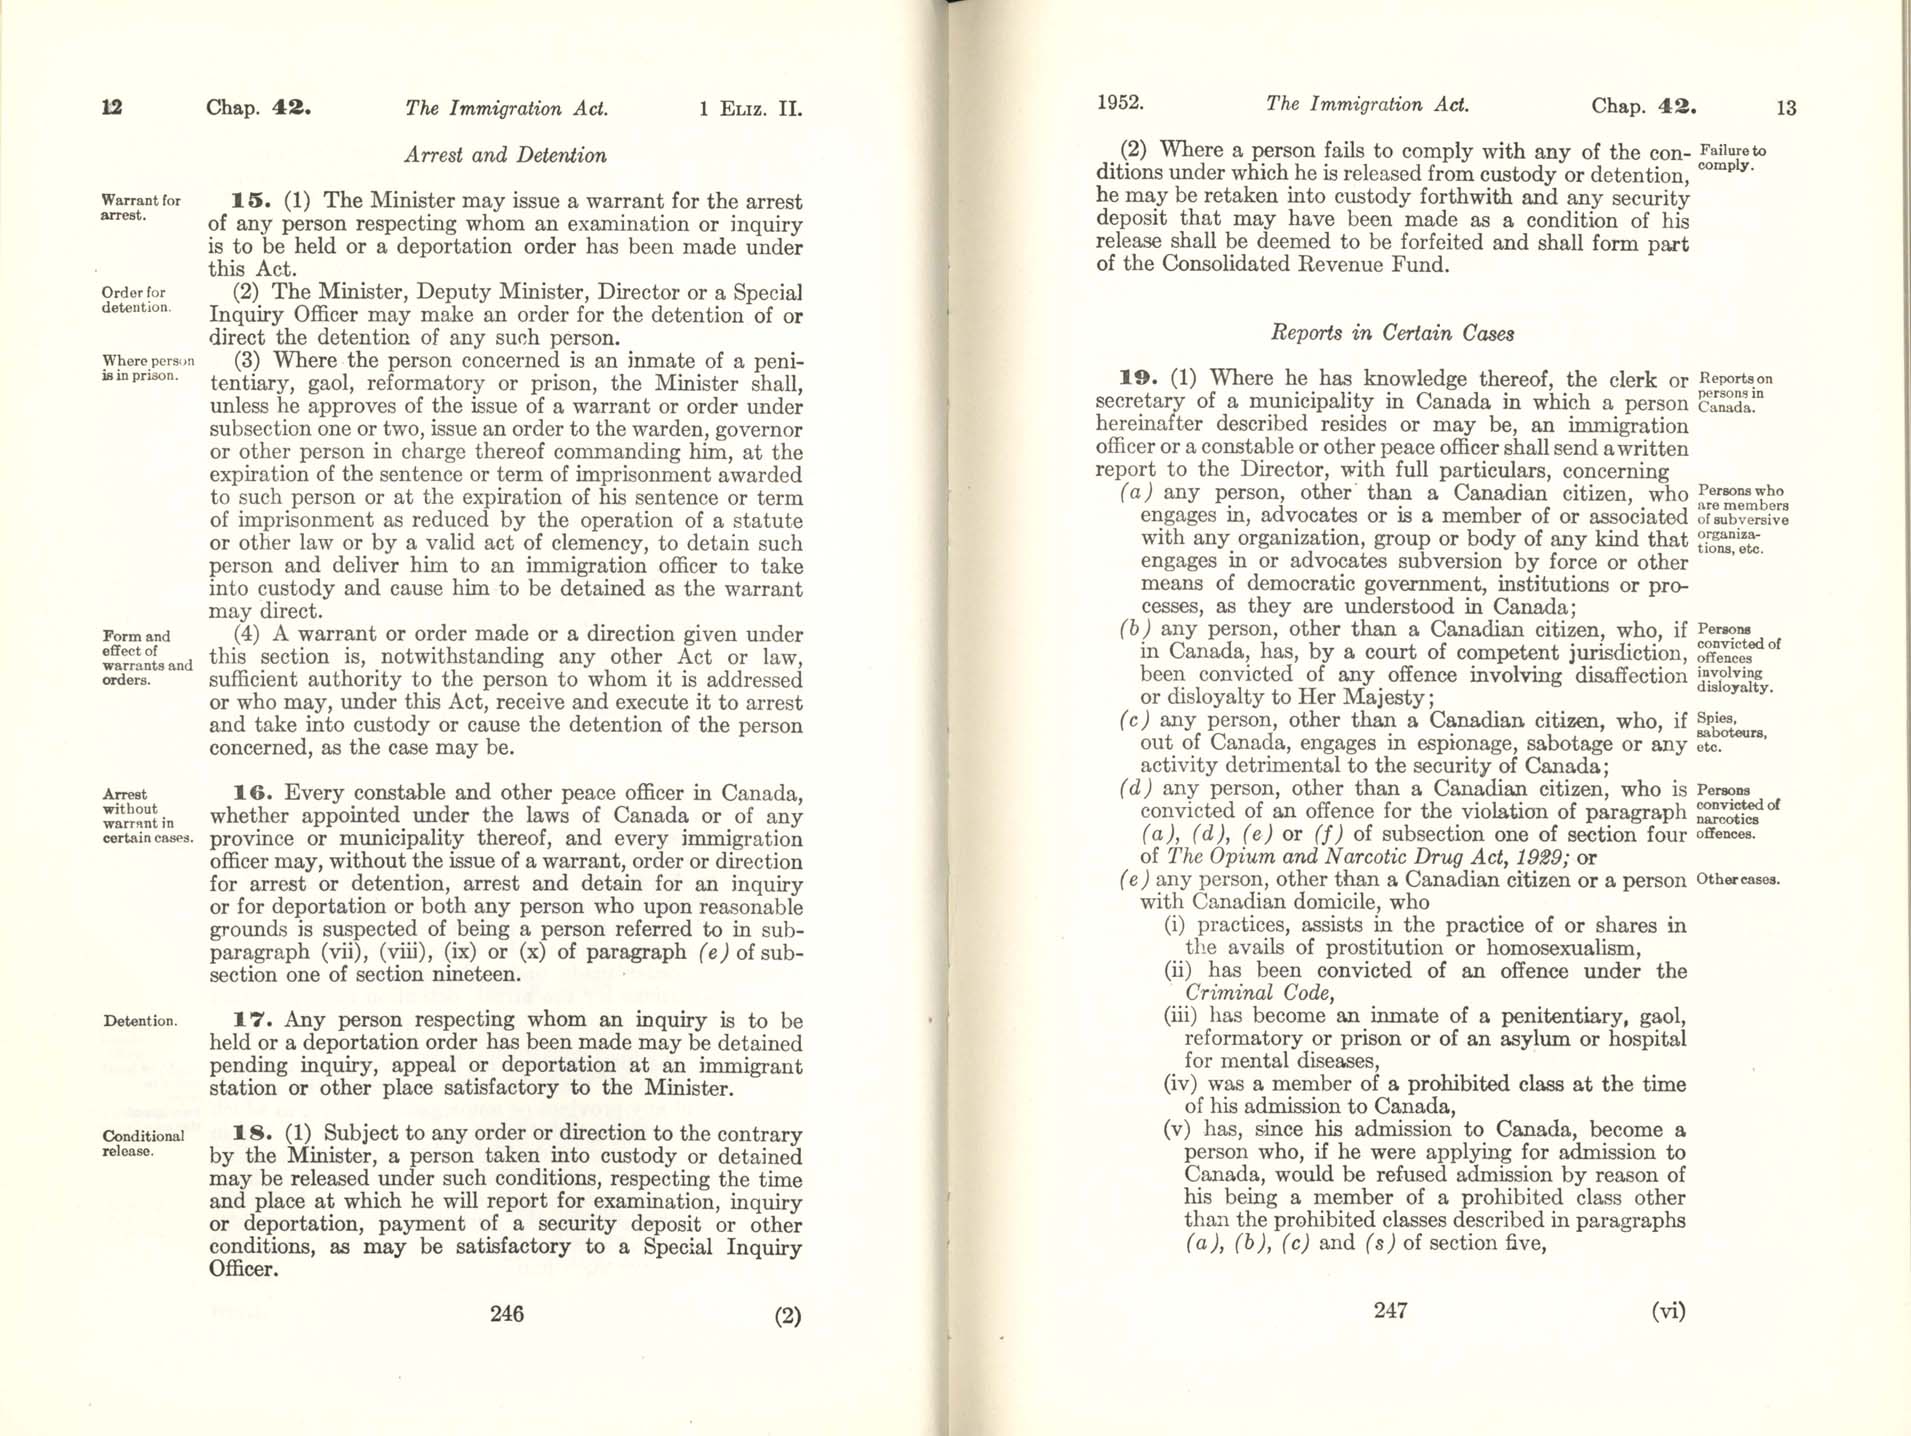 CHAP 42 Page 246, 247 Immigration Act, 1952